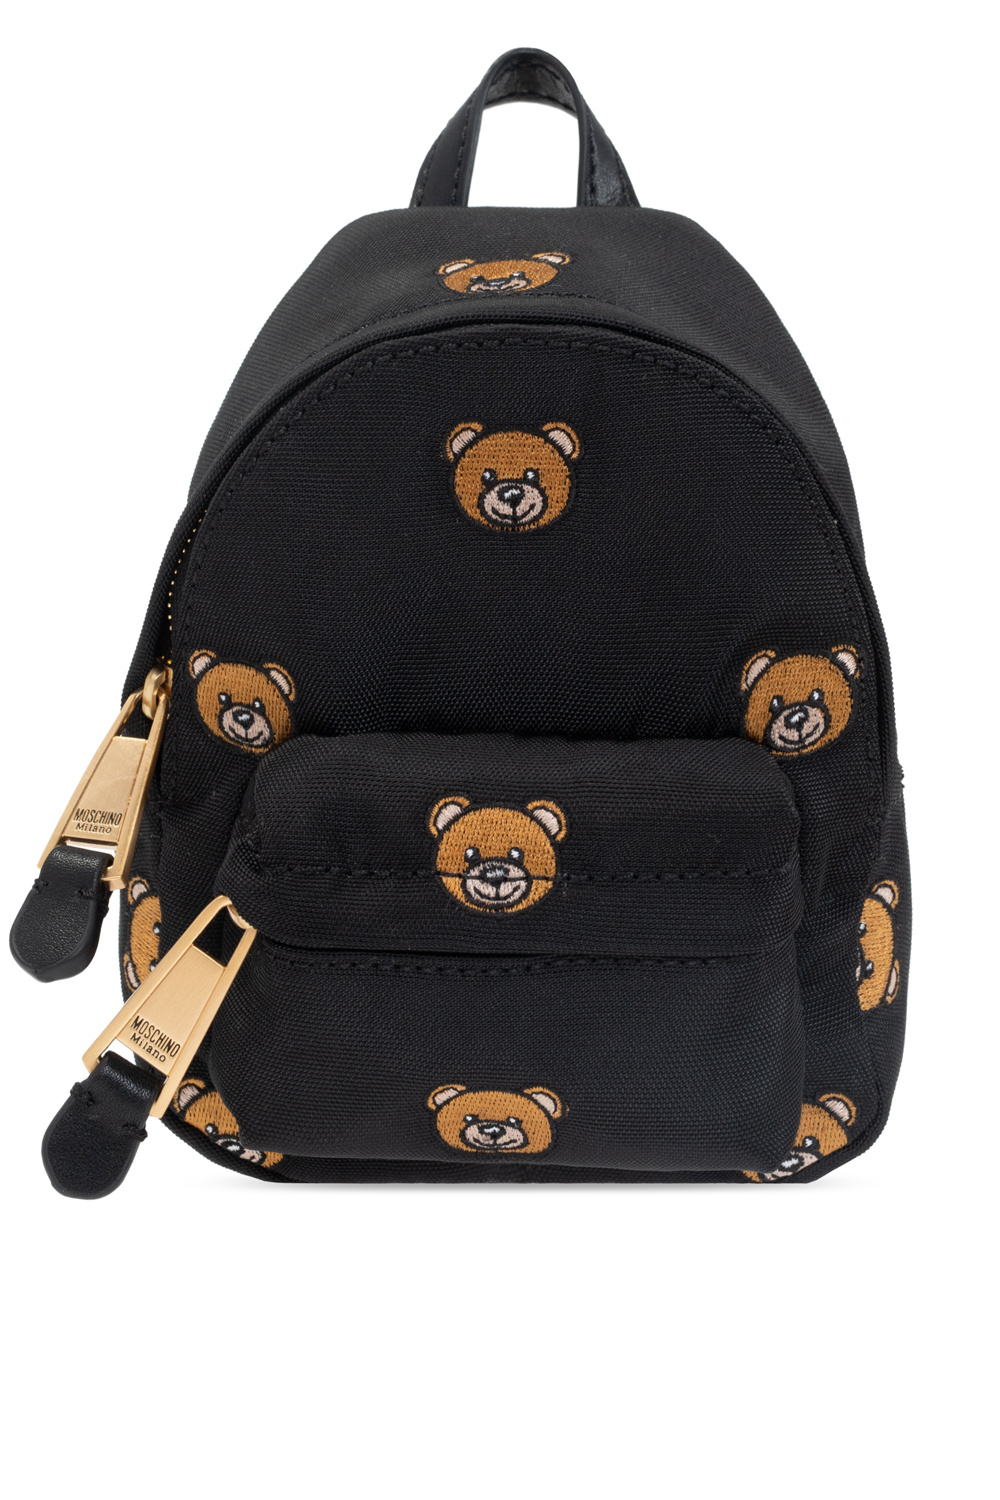 Moschino Micro backpack with Teddy bear | Women's Bags | Vitkac